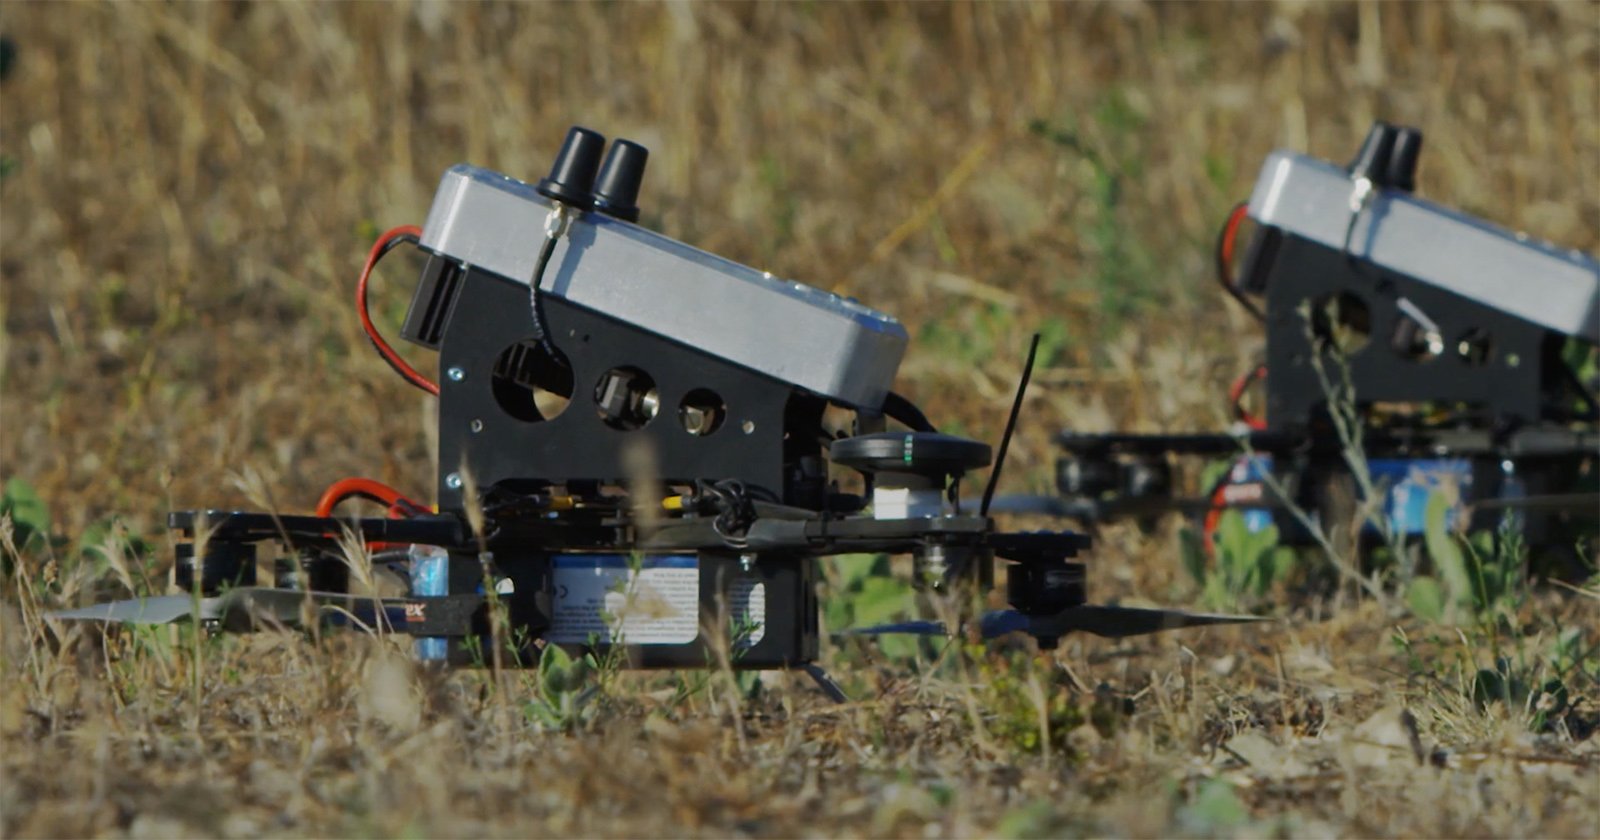 Watch Andurils Battering-Ram Drone Knock Other Drones Out of the Sky